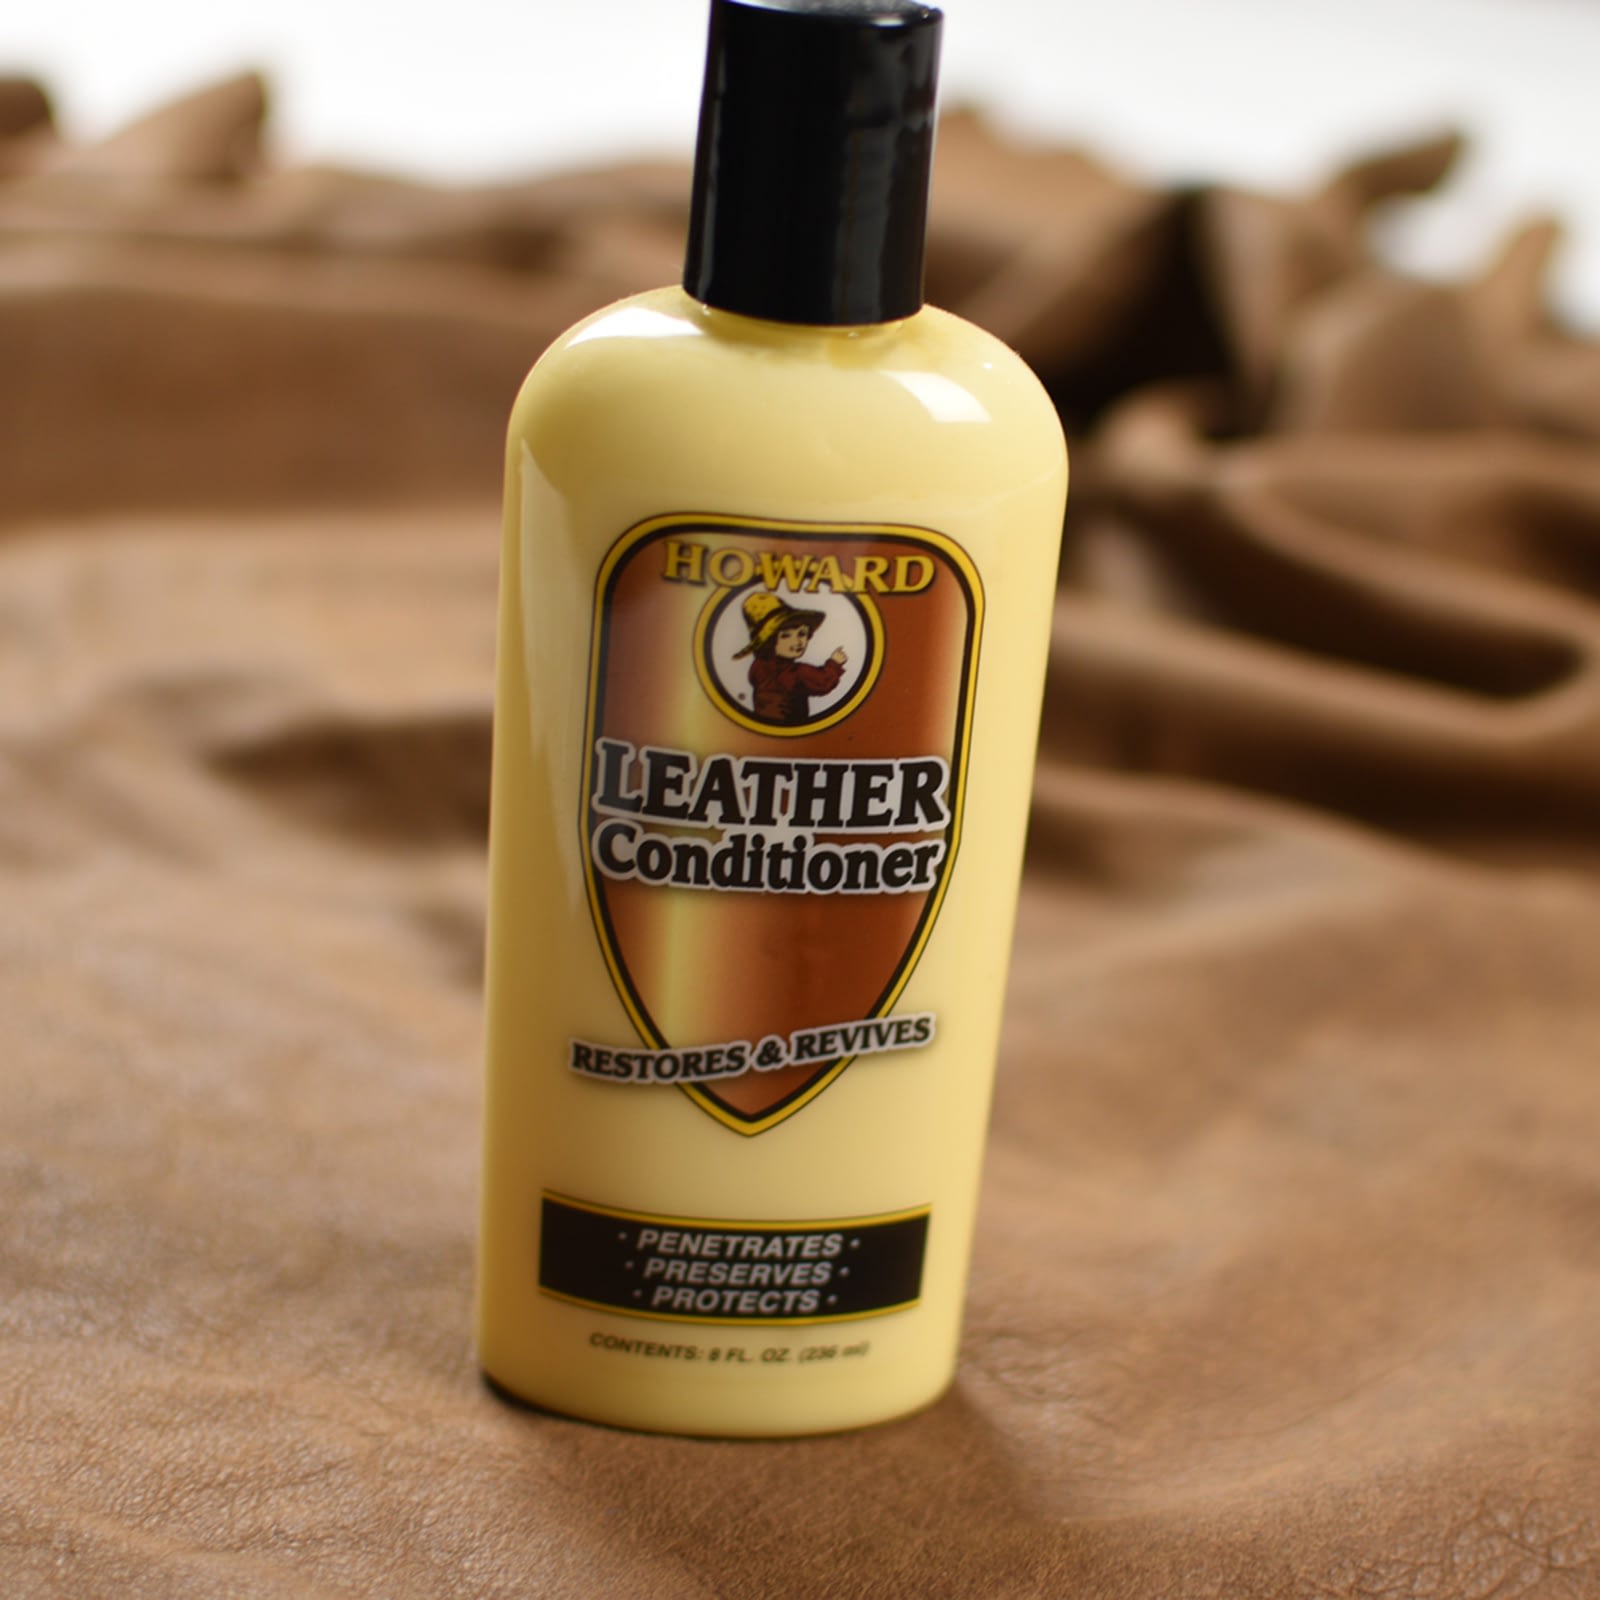 Safe Natural Best Leather Conditioner, Howard Leather Conditioner